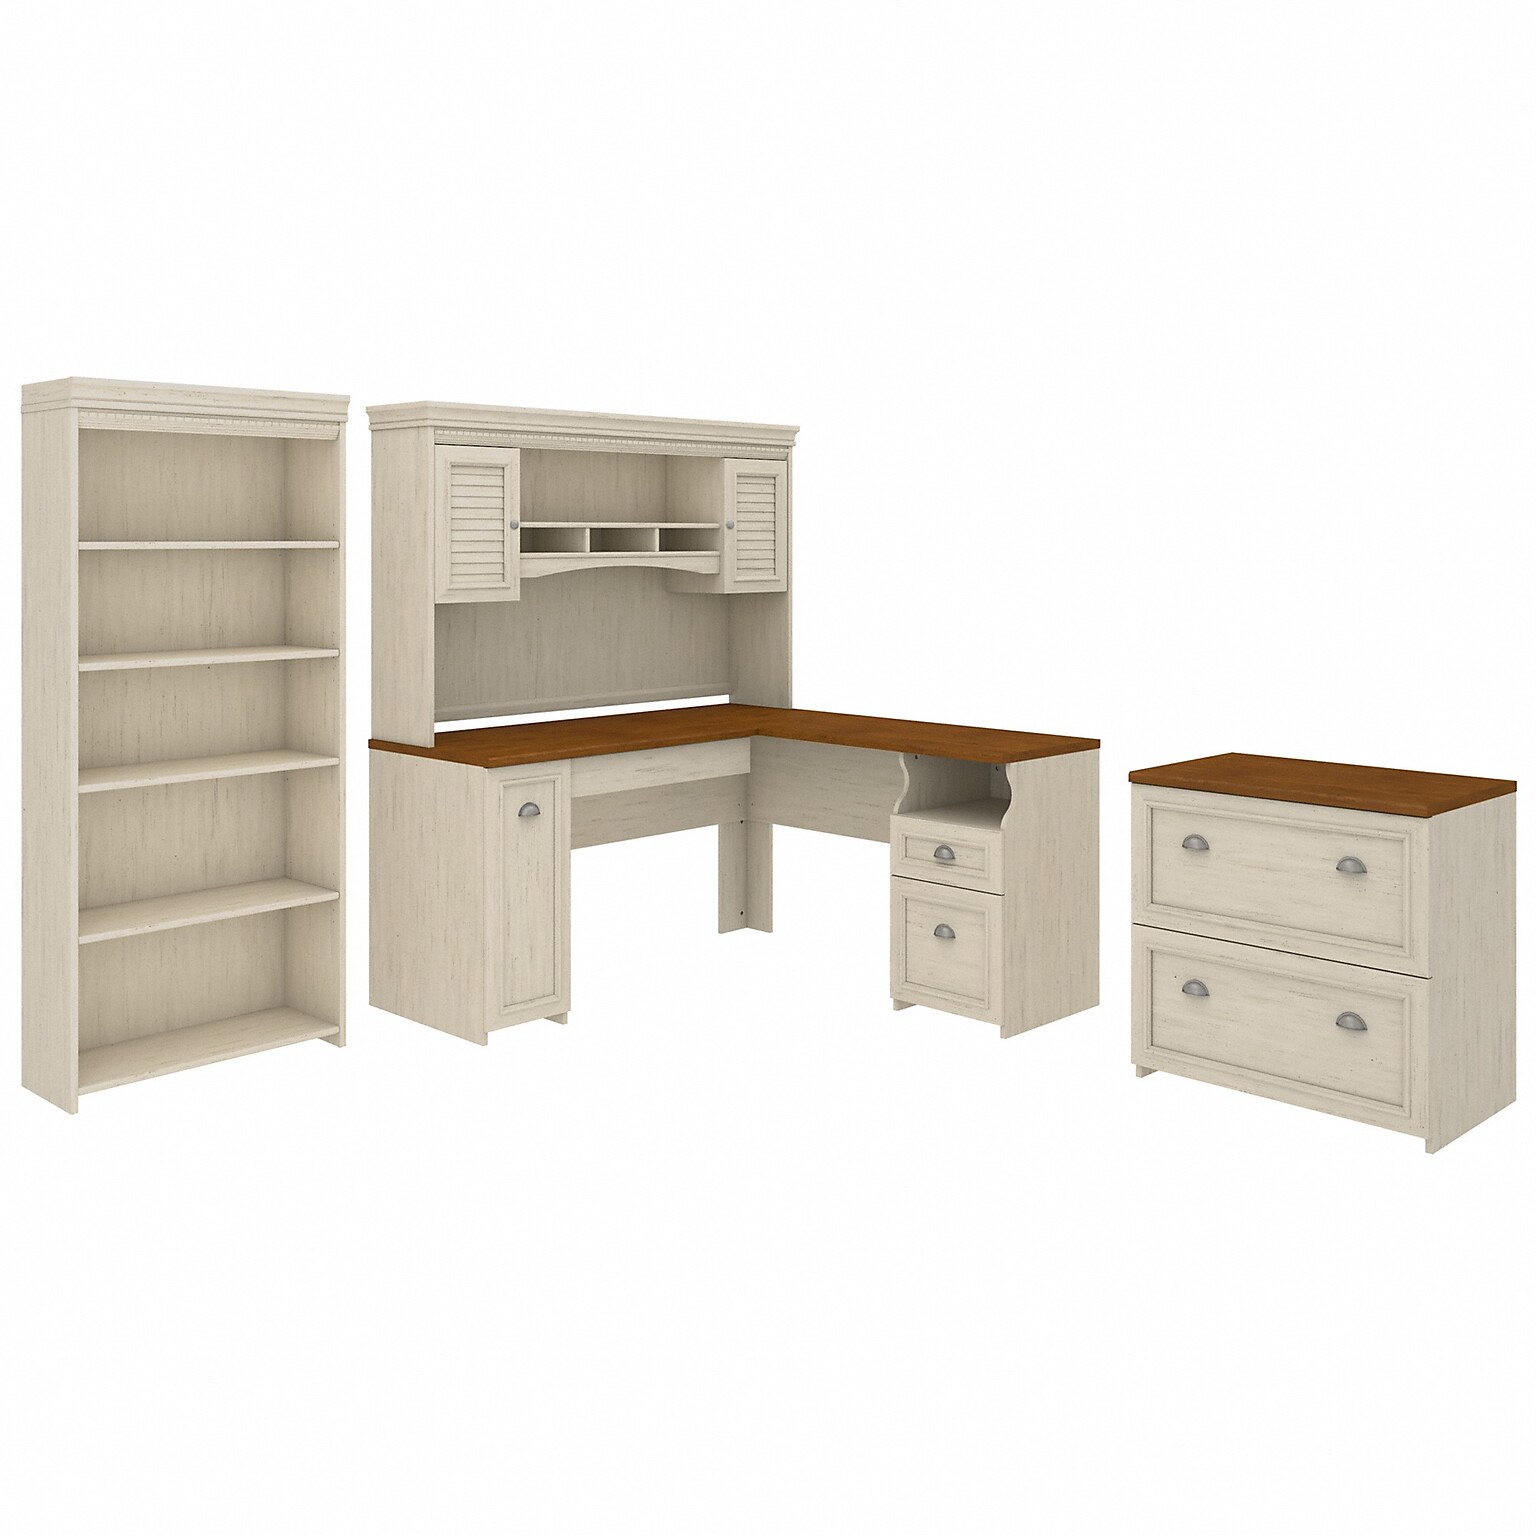 Bush Furniture Fairview 60 W L Shaped Desk with Hutch, Bookcase and Lateral File Cabinet Bundle, Antique White (FV006AW)